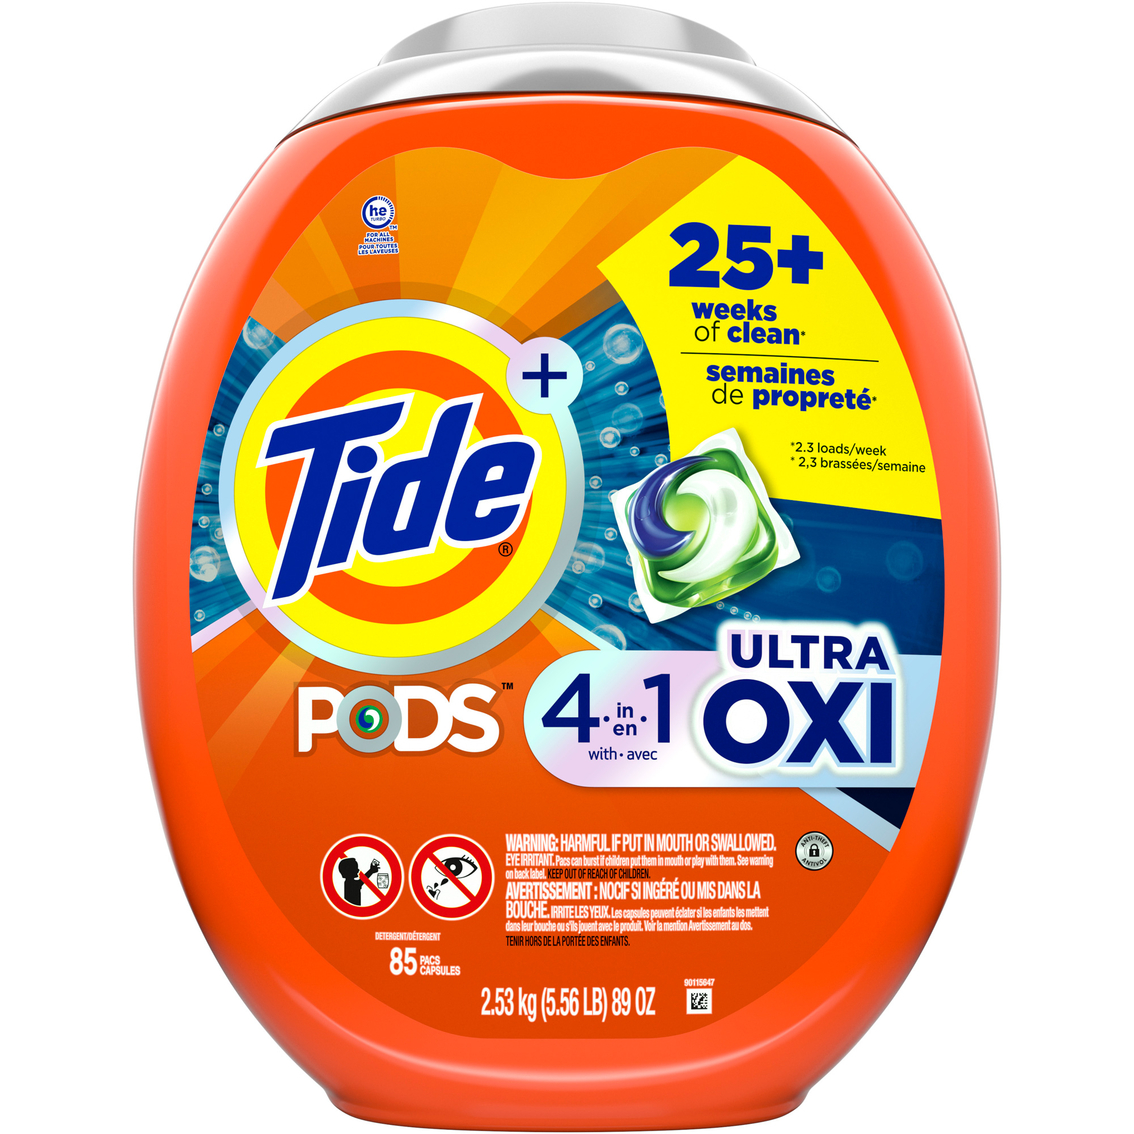 Tide Power Pods Clean Laundry Detergent - Free & Gentle - 45ct